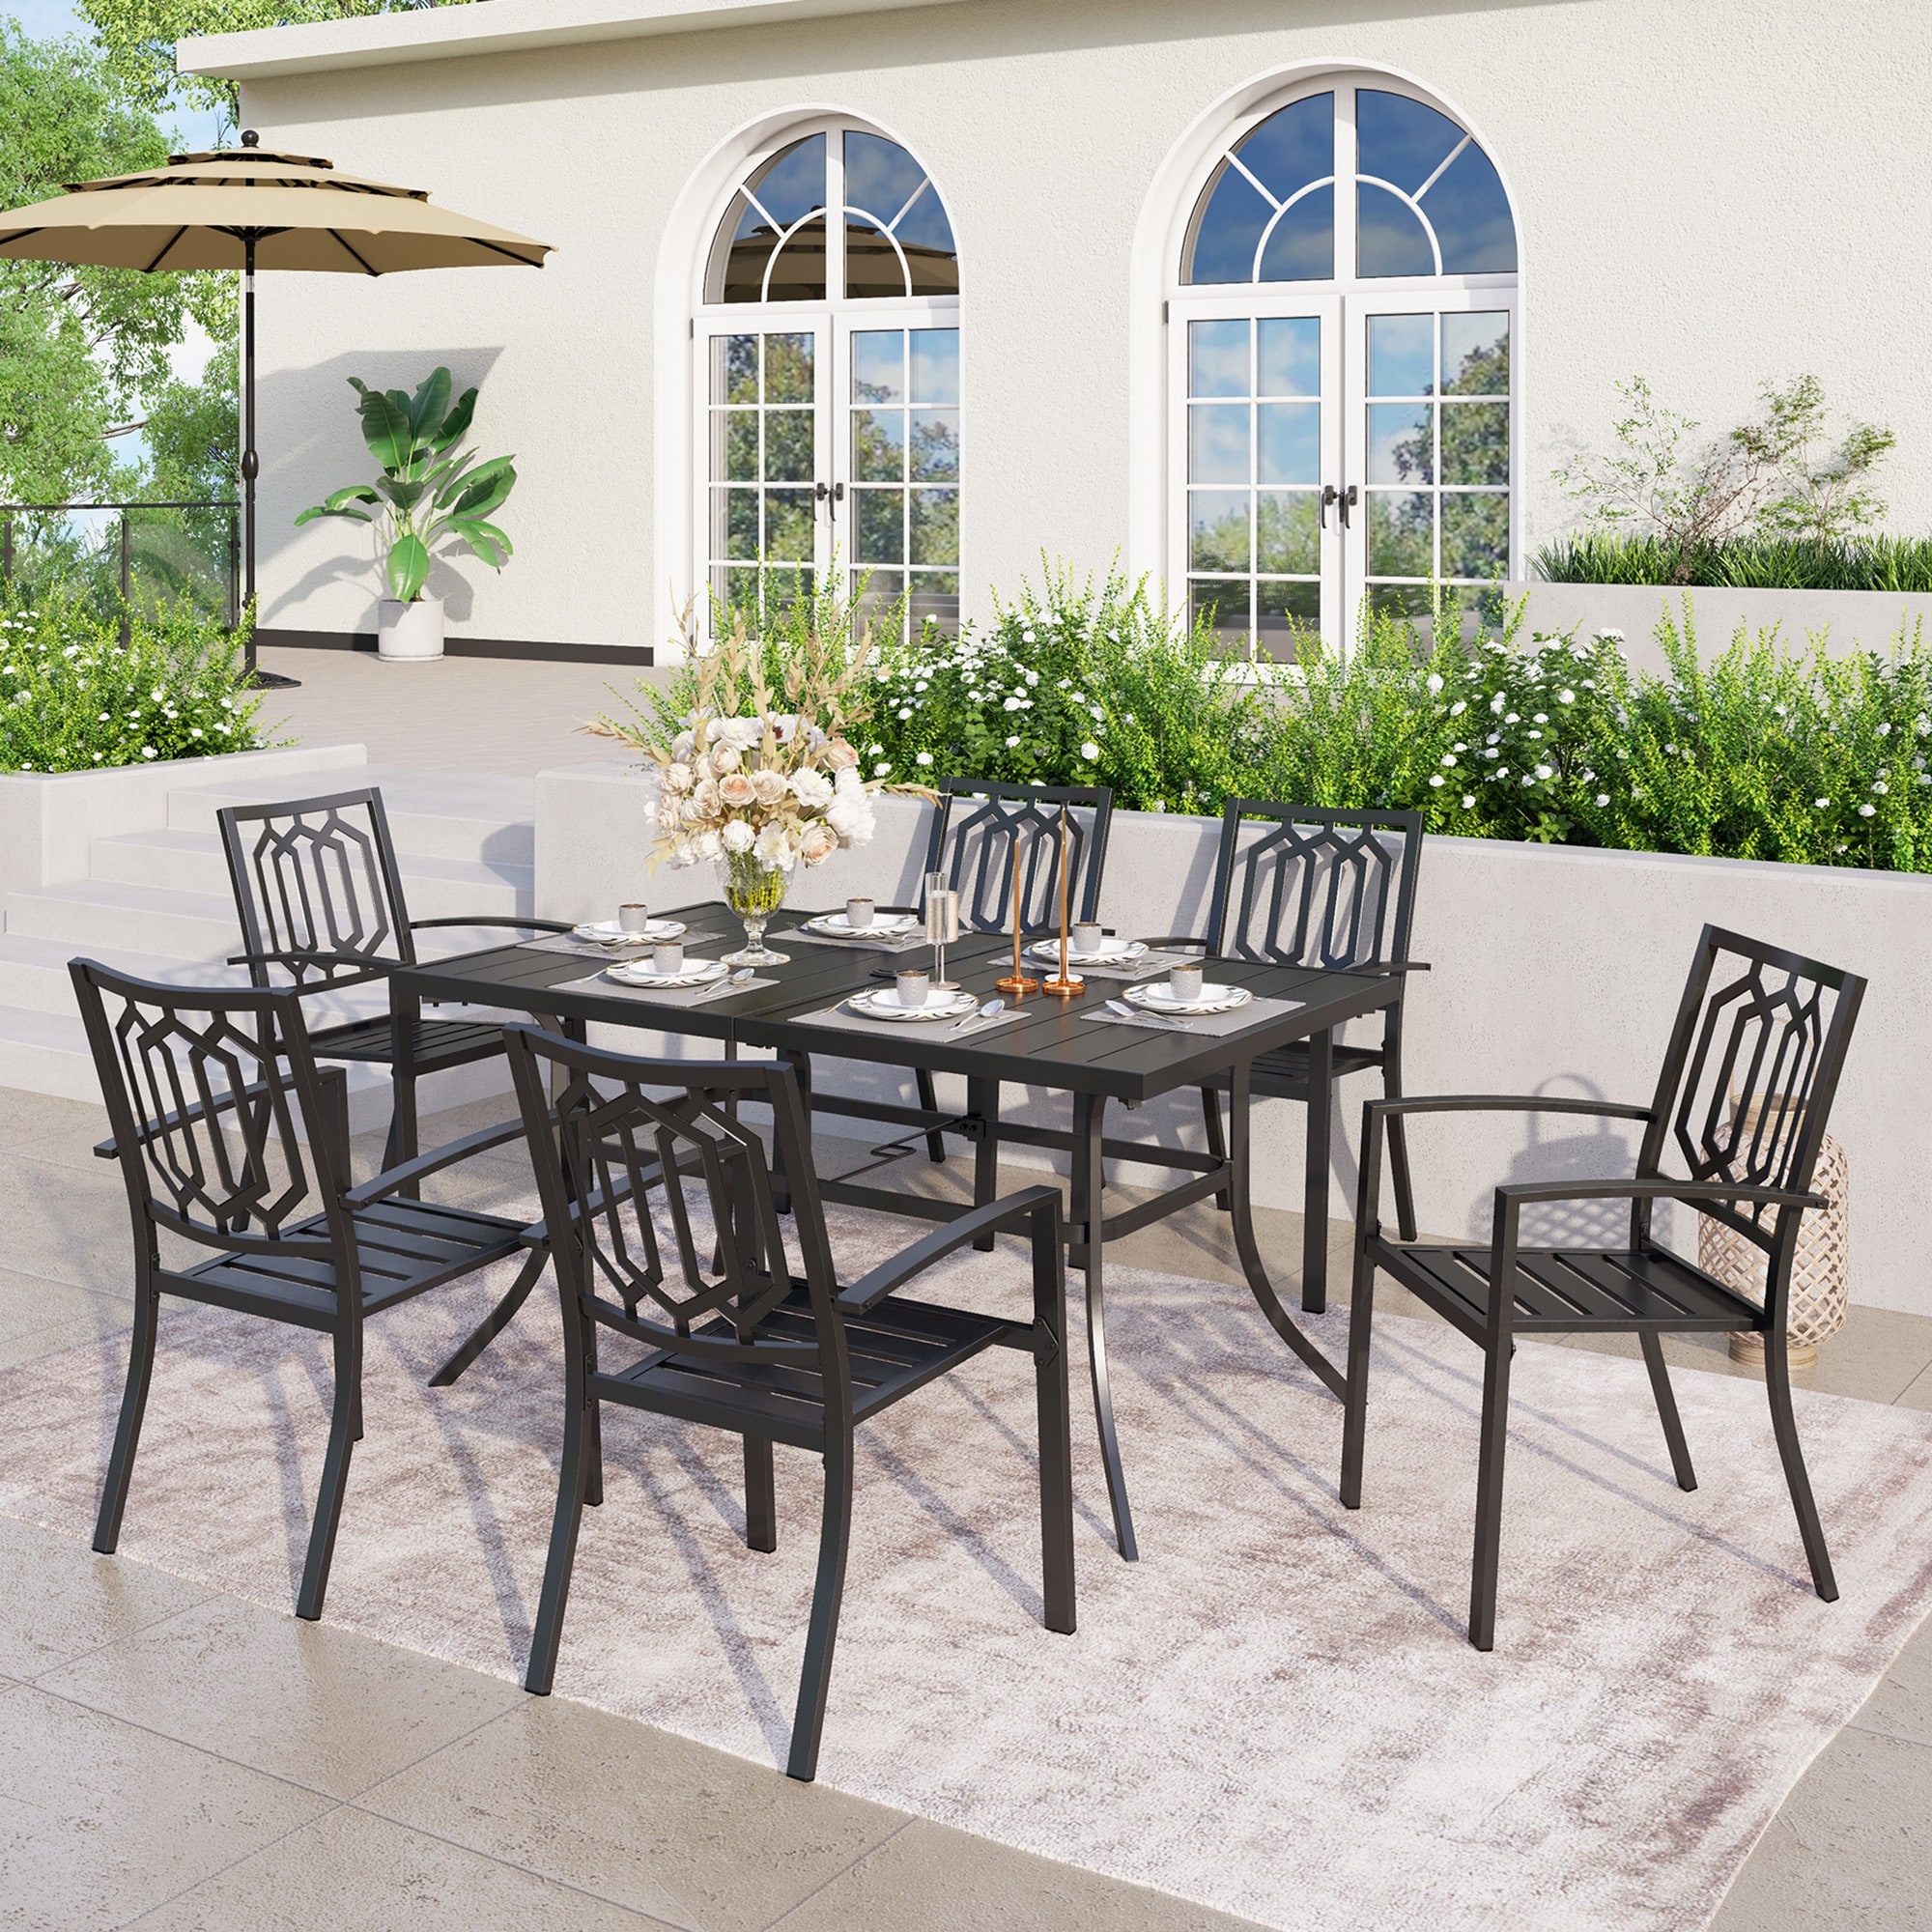 Patio Dining Set 7 Piece Metal Rectangle Patio Table With 2.6 Umbrella Hole And 6 Metal Dining Chairs  Black